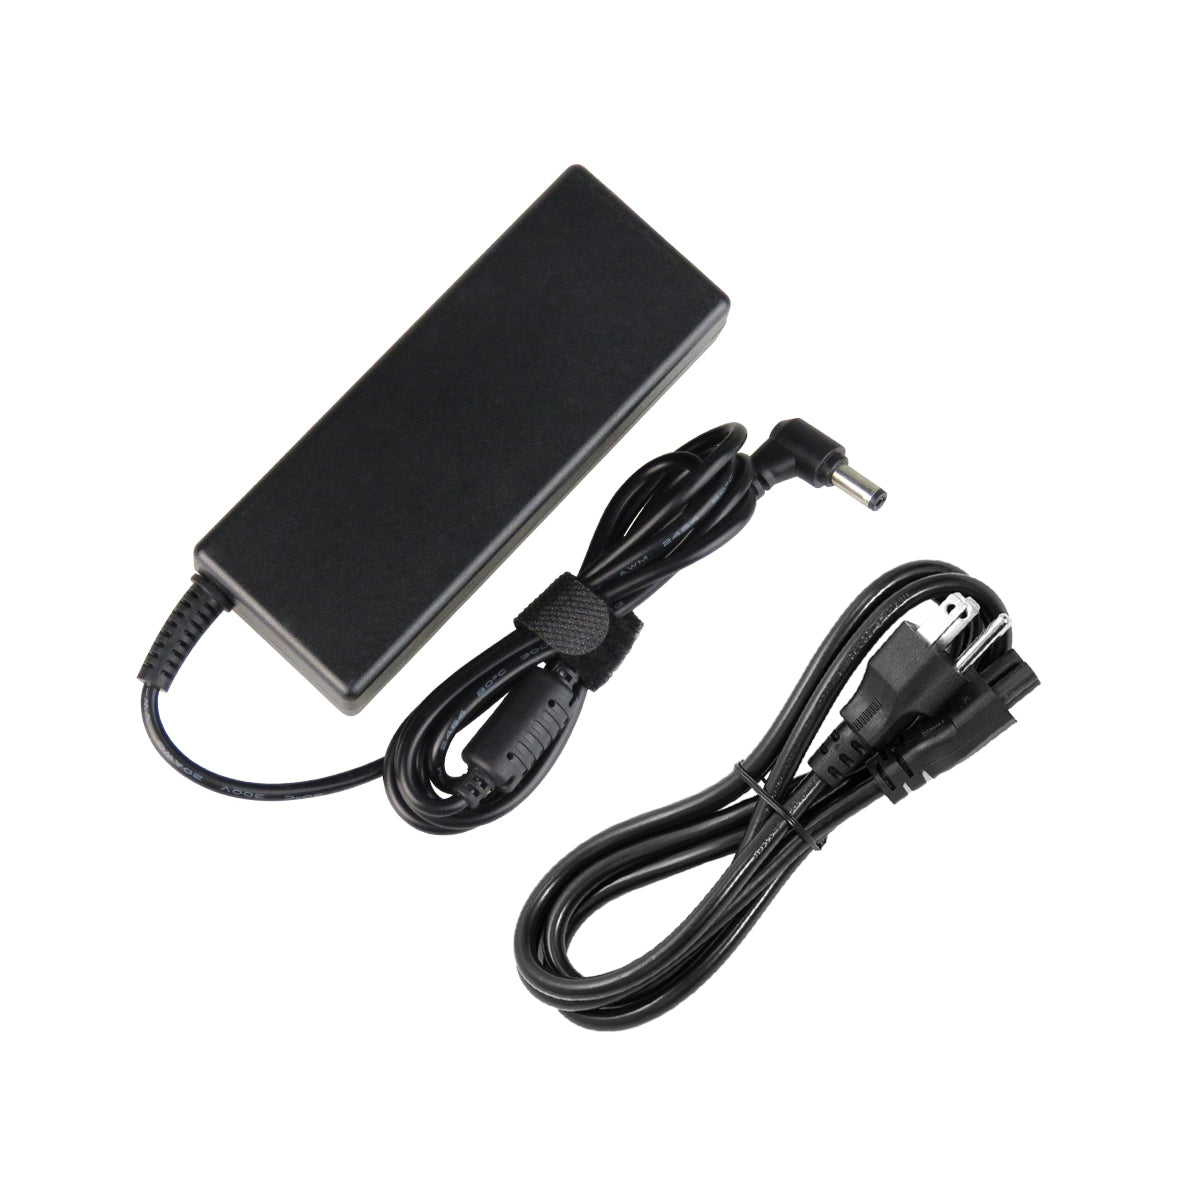 AC Adapter Charger for ASUS N46 Notebook.